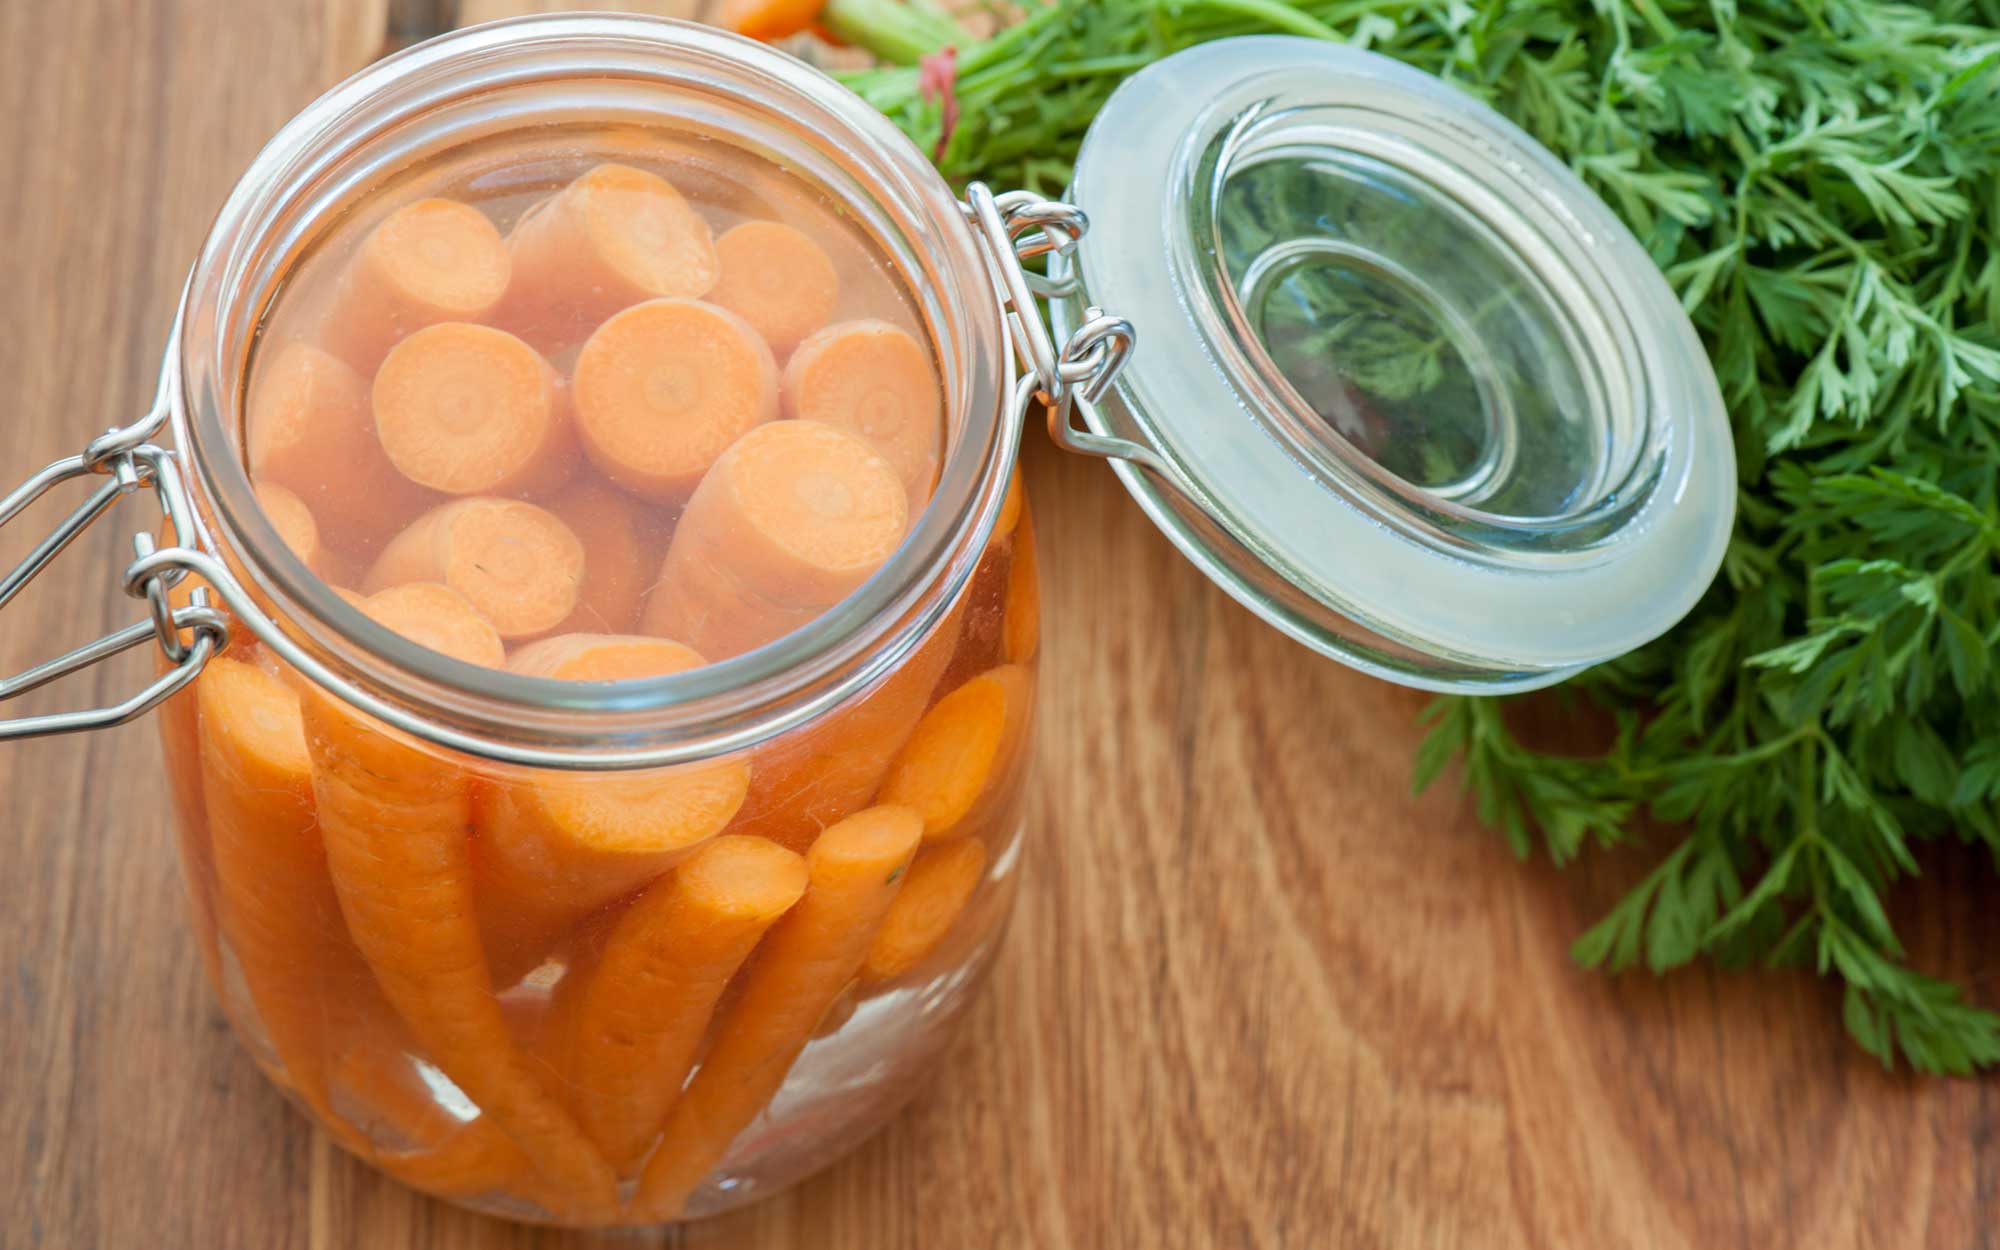 Several cut carrots placed in a canning jar.